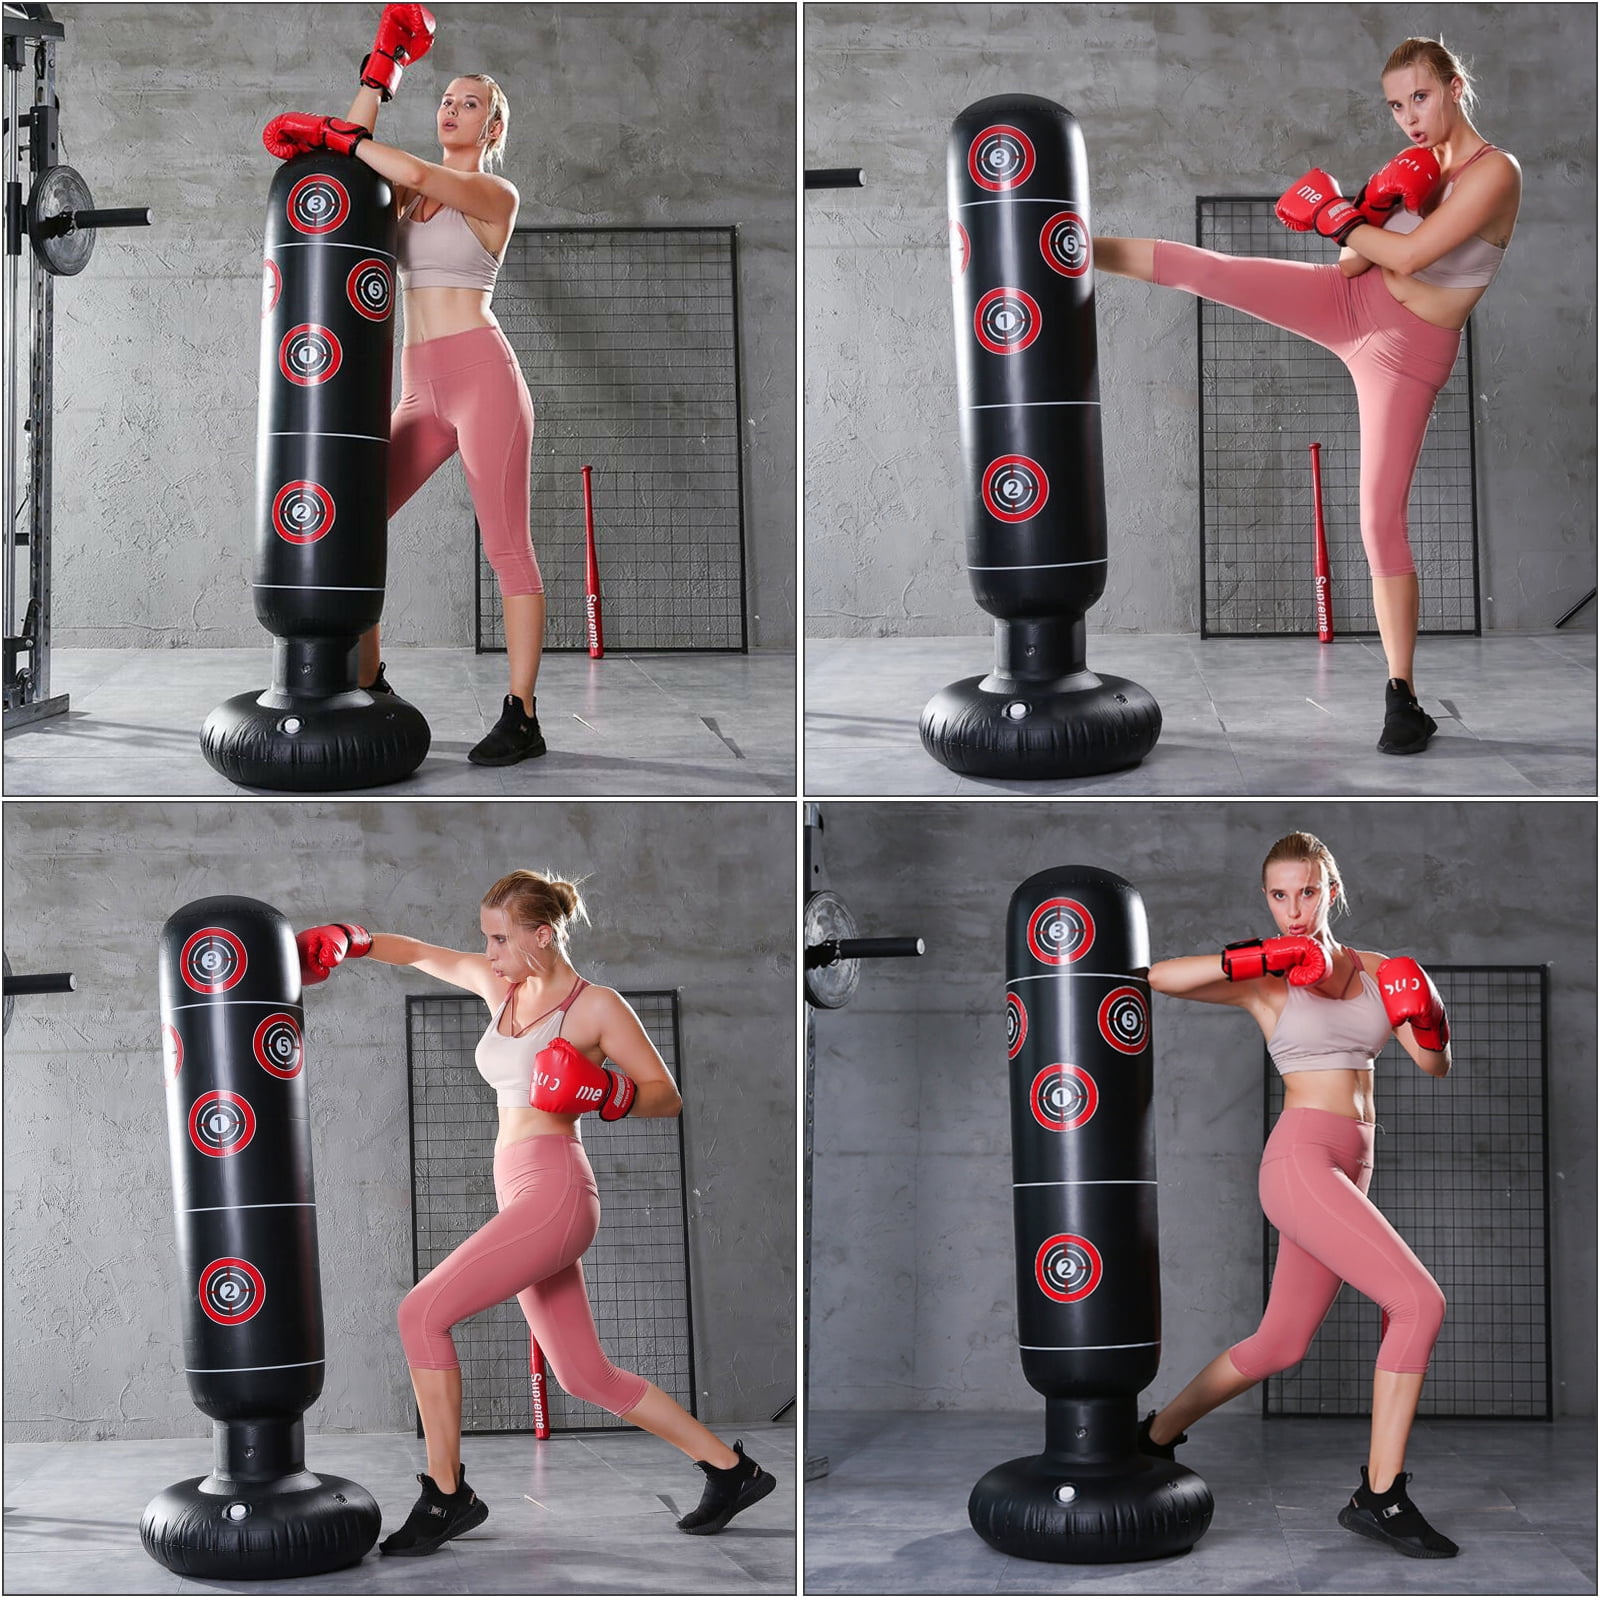 Free Standing Punching Bag Workout for Beginners - YouTube